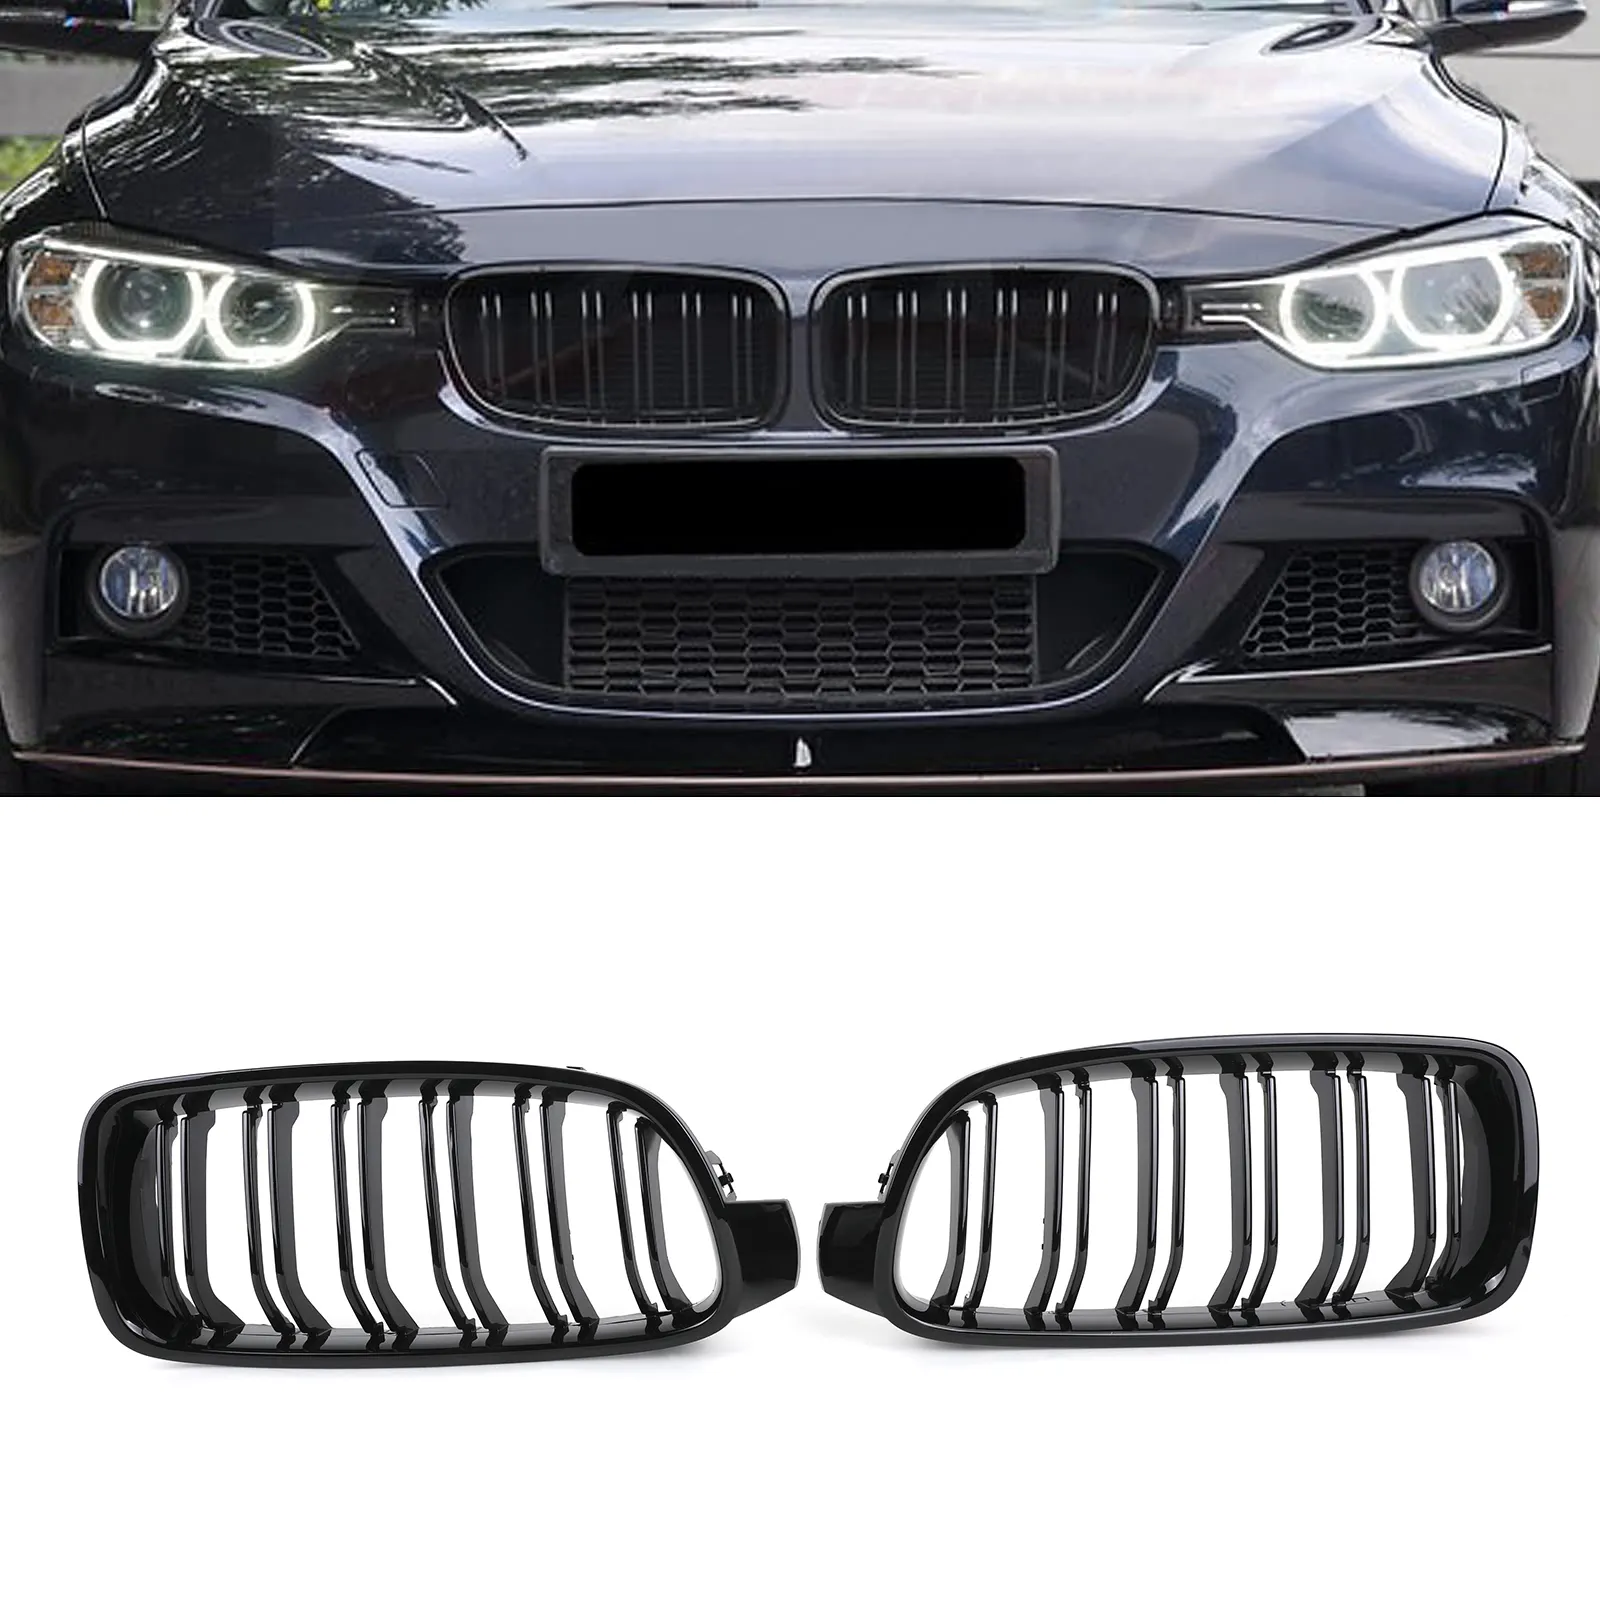 ABS Plastic Chrome Glossy Black Double Slats Front Kidney Grille for BMW 3 Series F30 F31 320i 330i 335i 340i